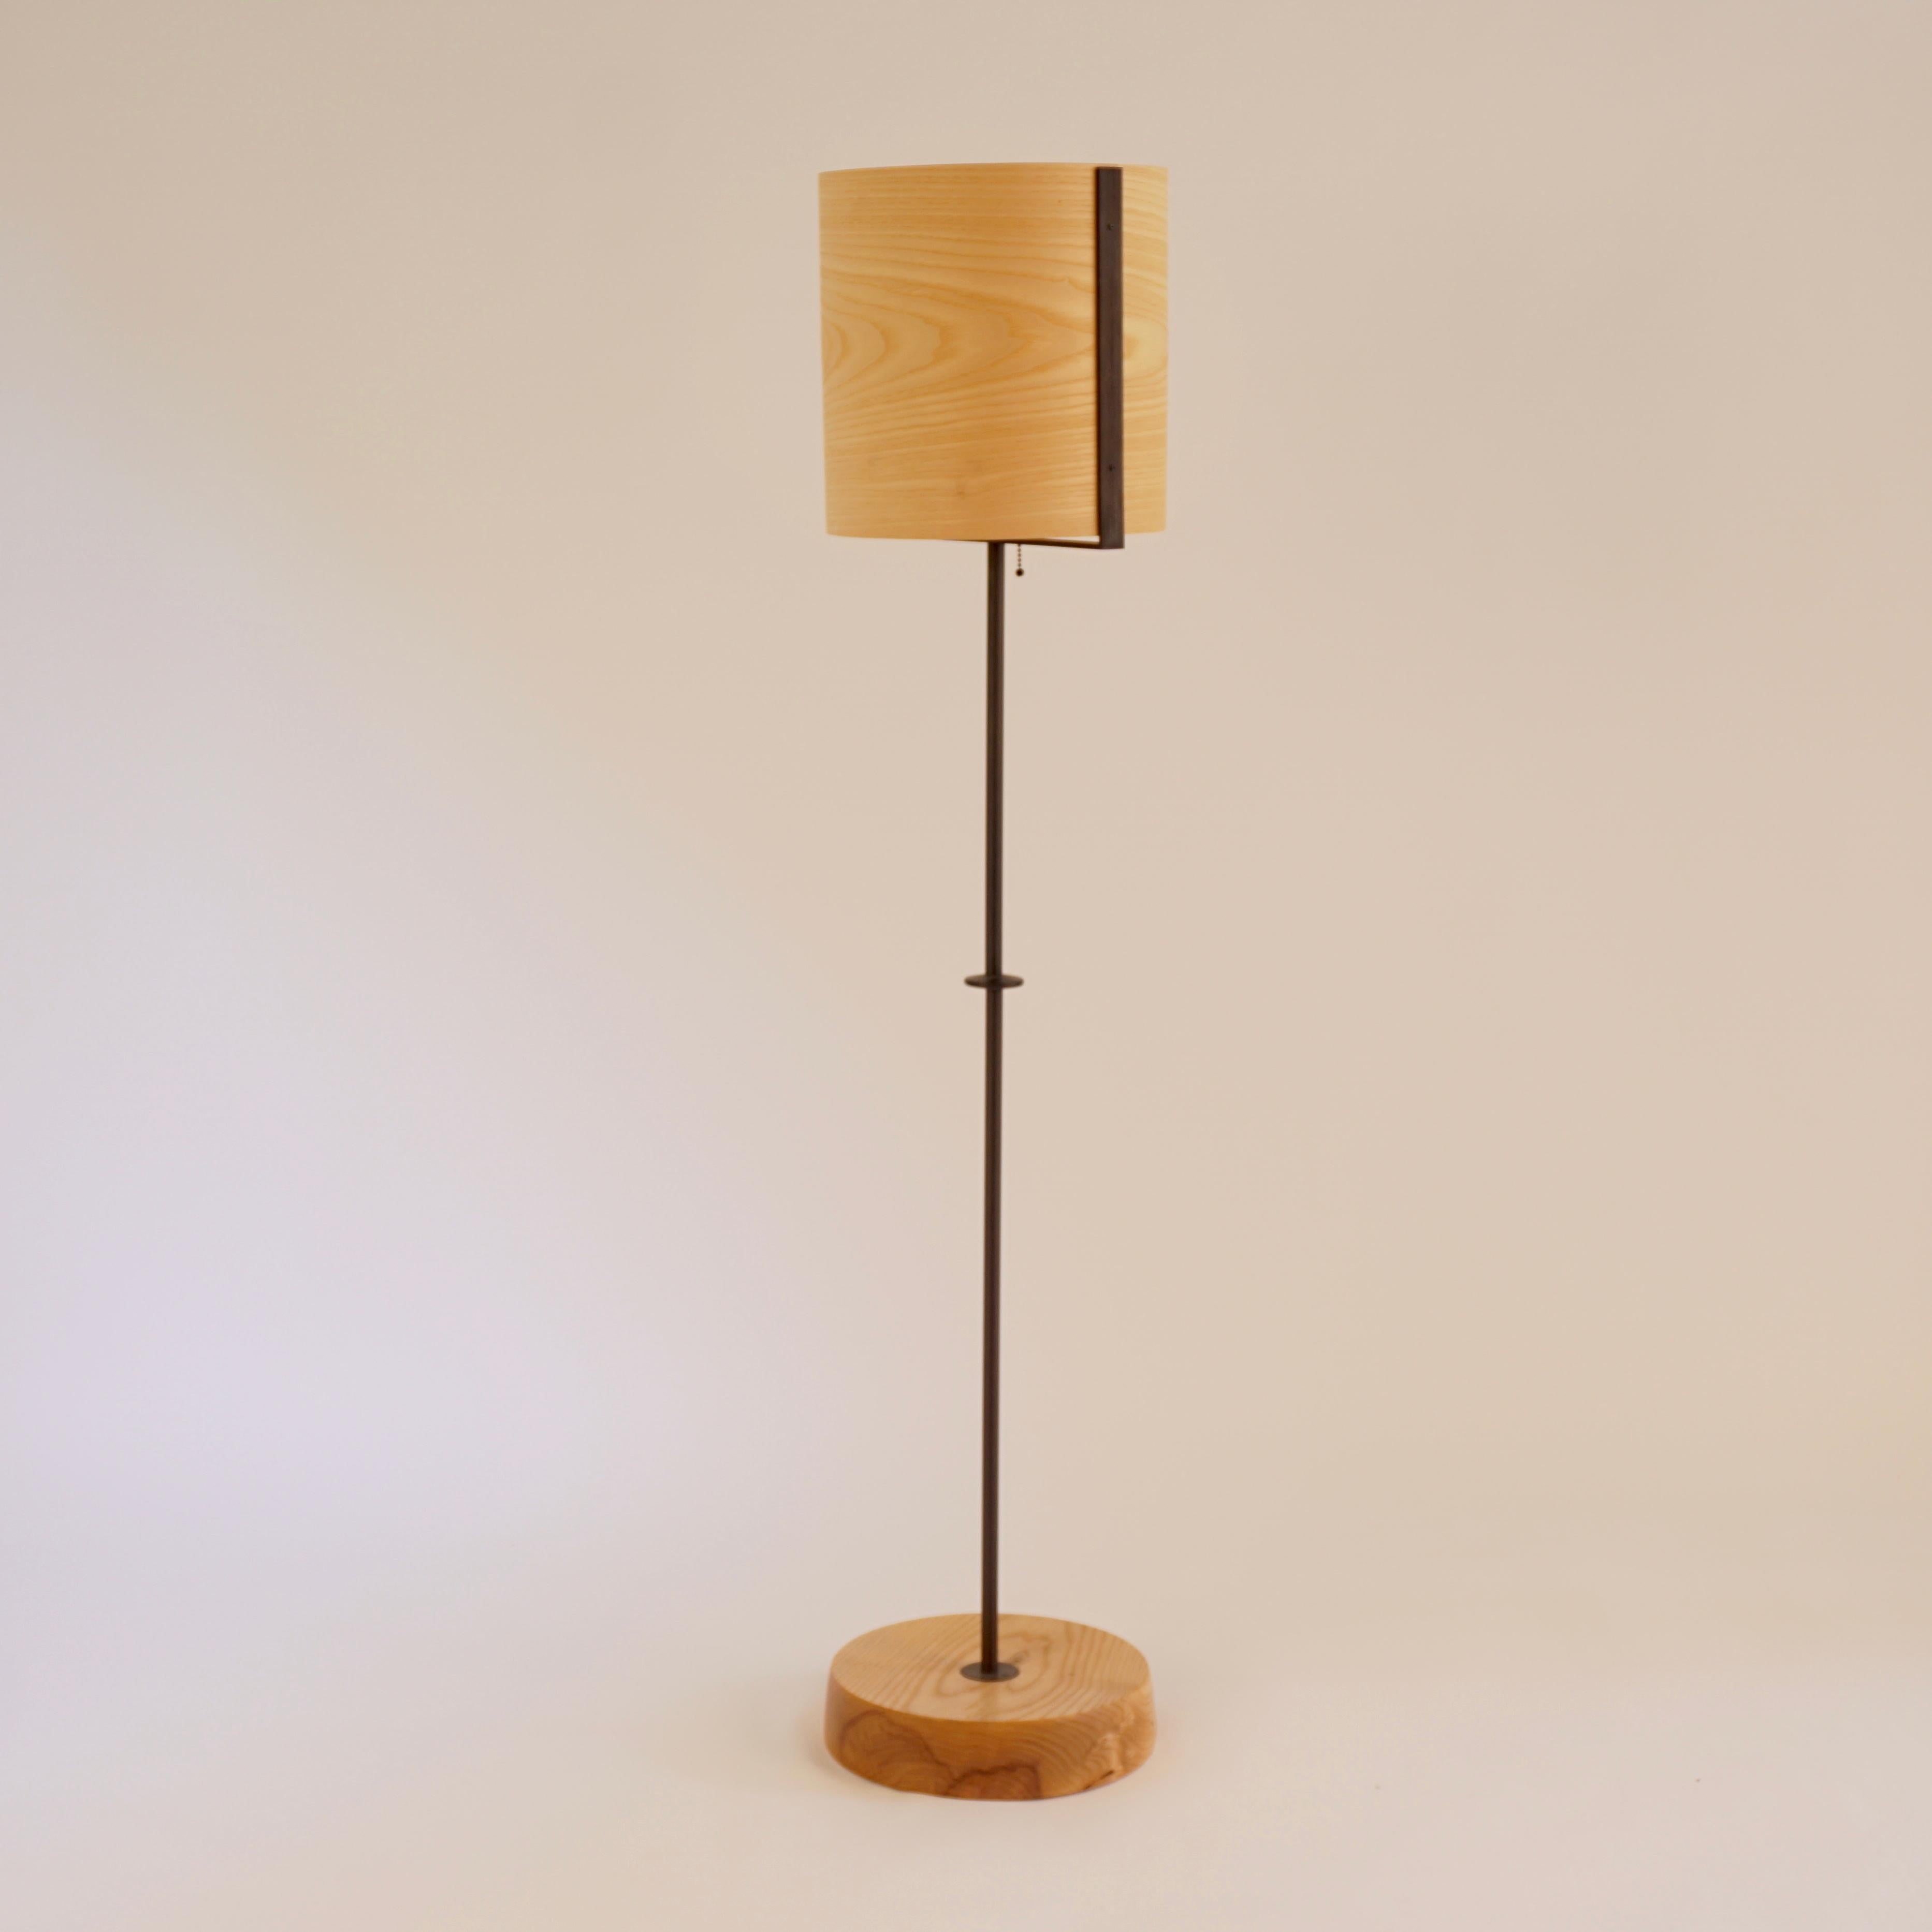 The ash veneer floor lamp #8 is part of the original Lehrecke Veneer Lighting Collection from 1998. The idea began with the beautiful way light passed through thin wood veneers, mostly local woods. The ash has a lightly yellow glow when lit and the